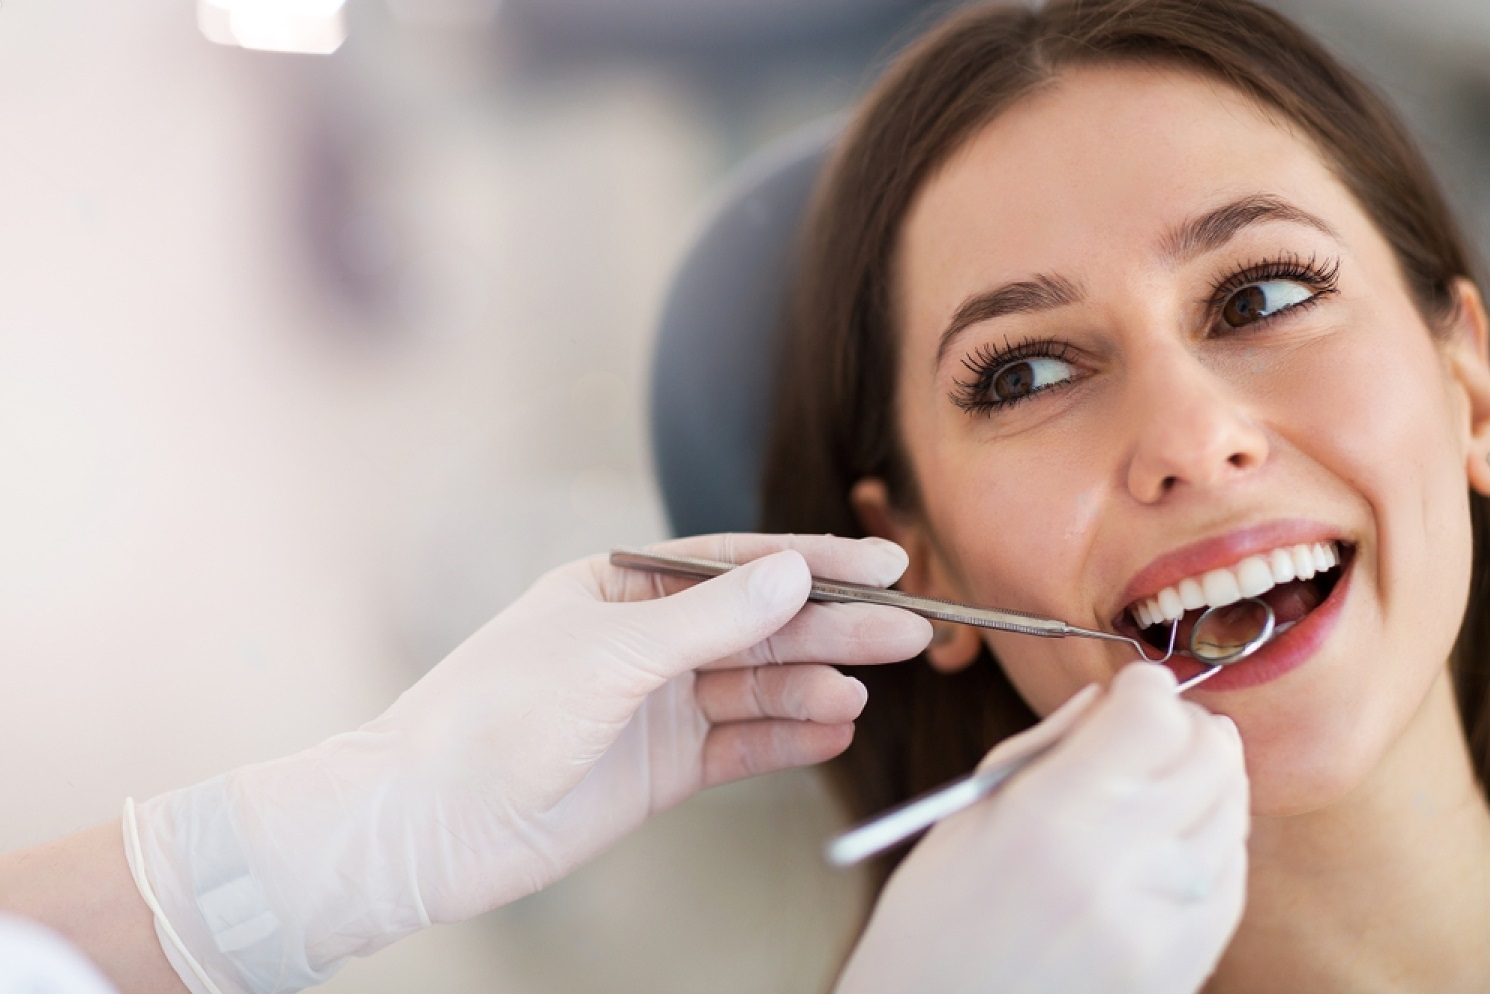 General Dentistry – A Range of Procedures Done and Services